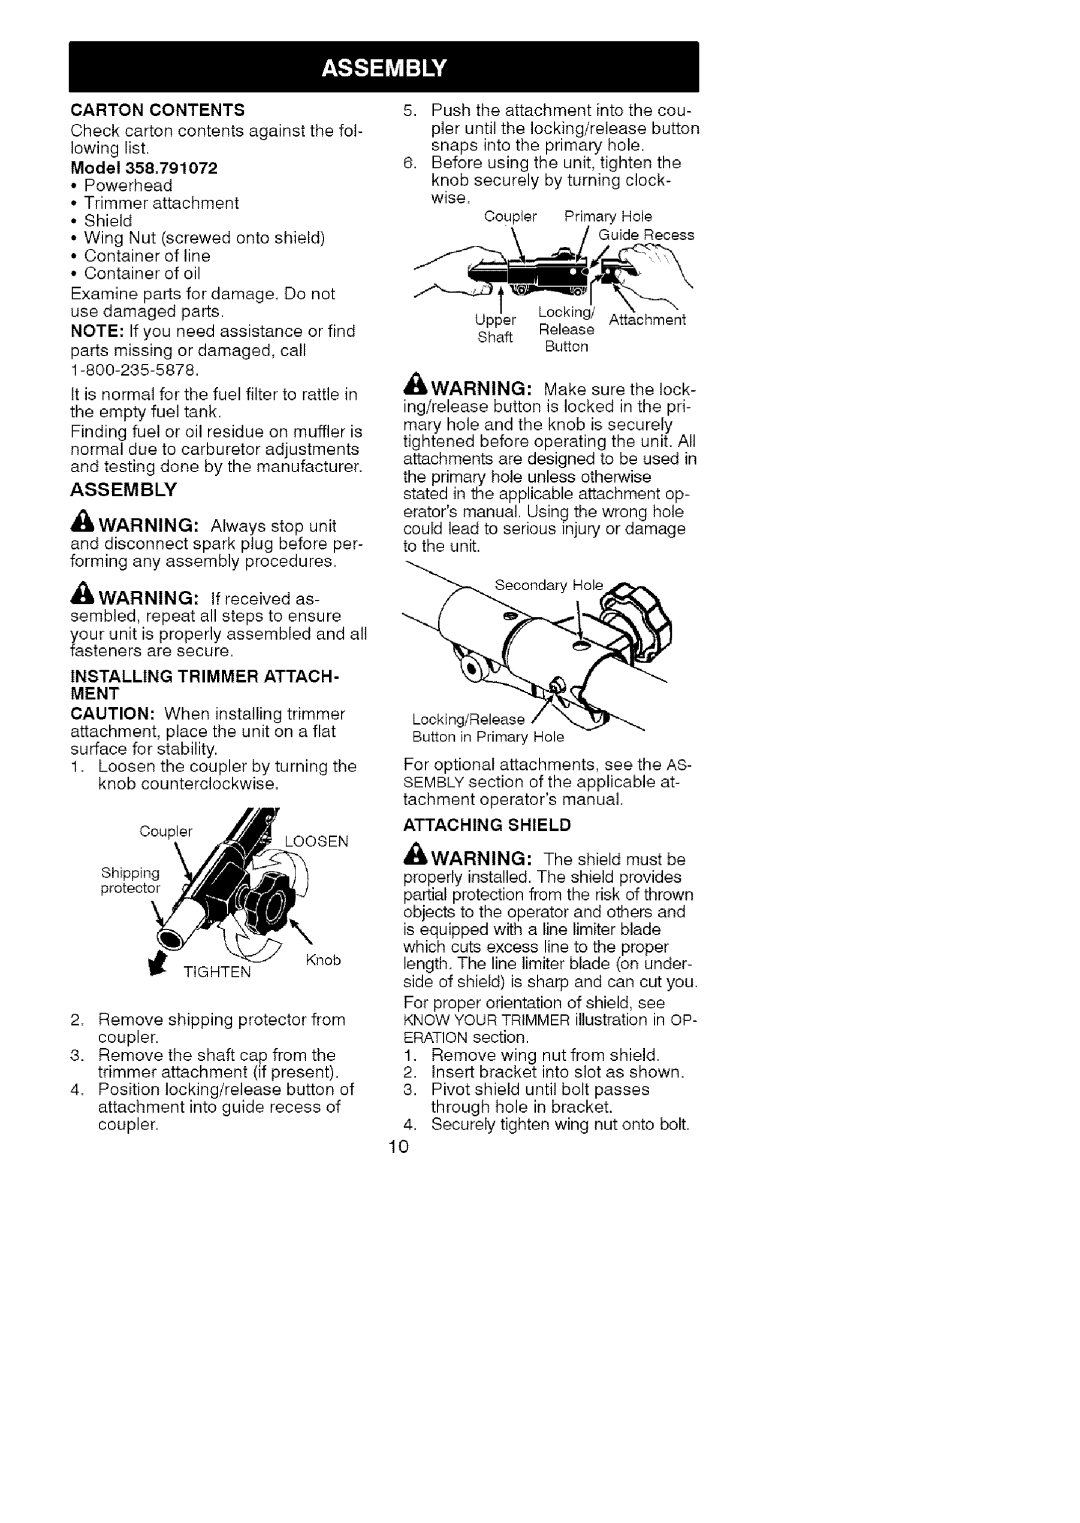 Craftsman 358.791072 manual Always stop unit, Installing Trimmer Attach Ment, Attaching Shield 